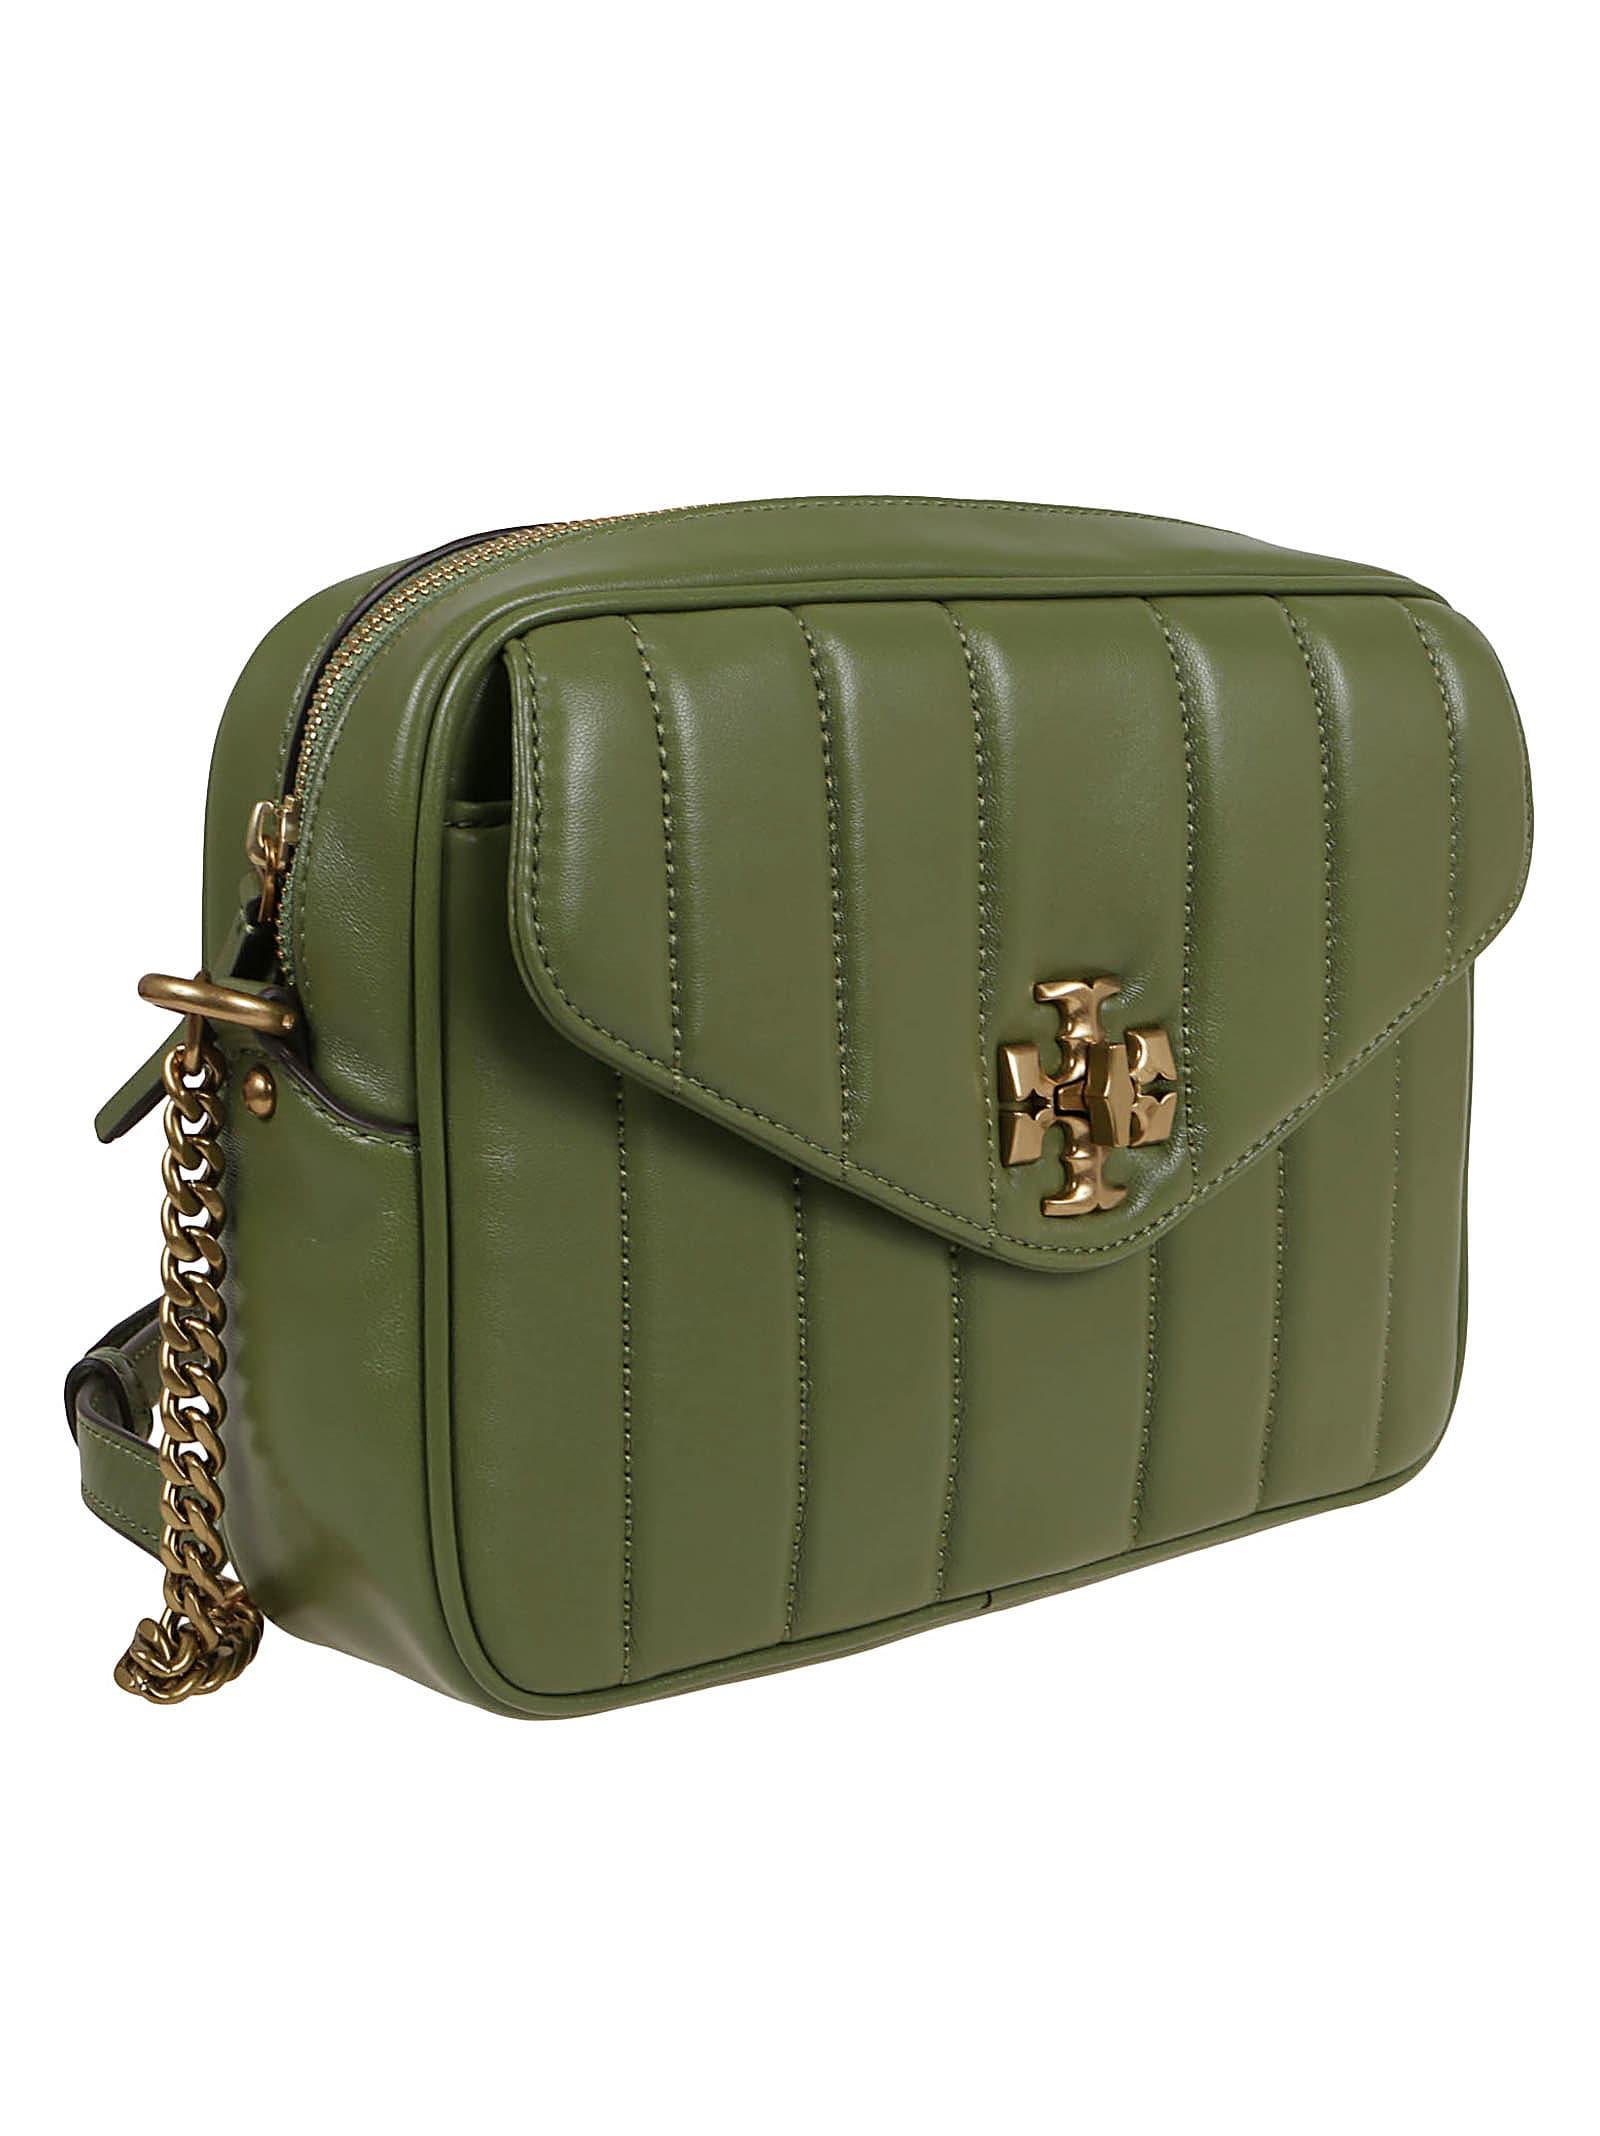 Tory Burch Kira Quilted Logo Plaque Camera Bag in Green